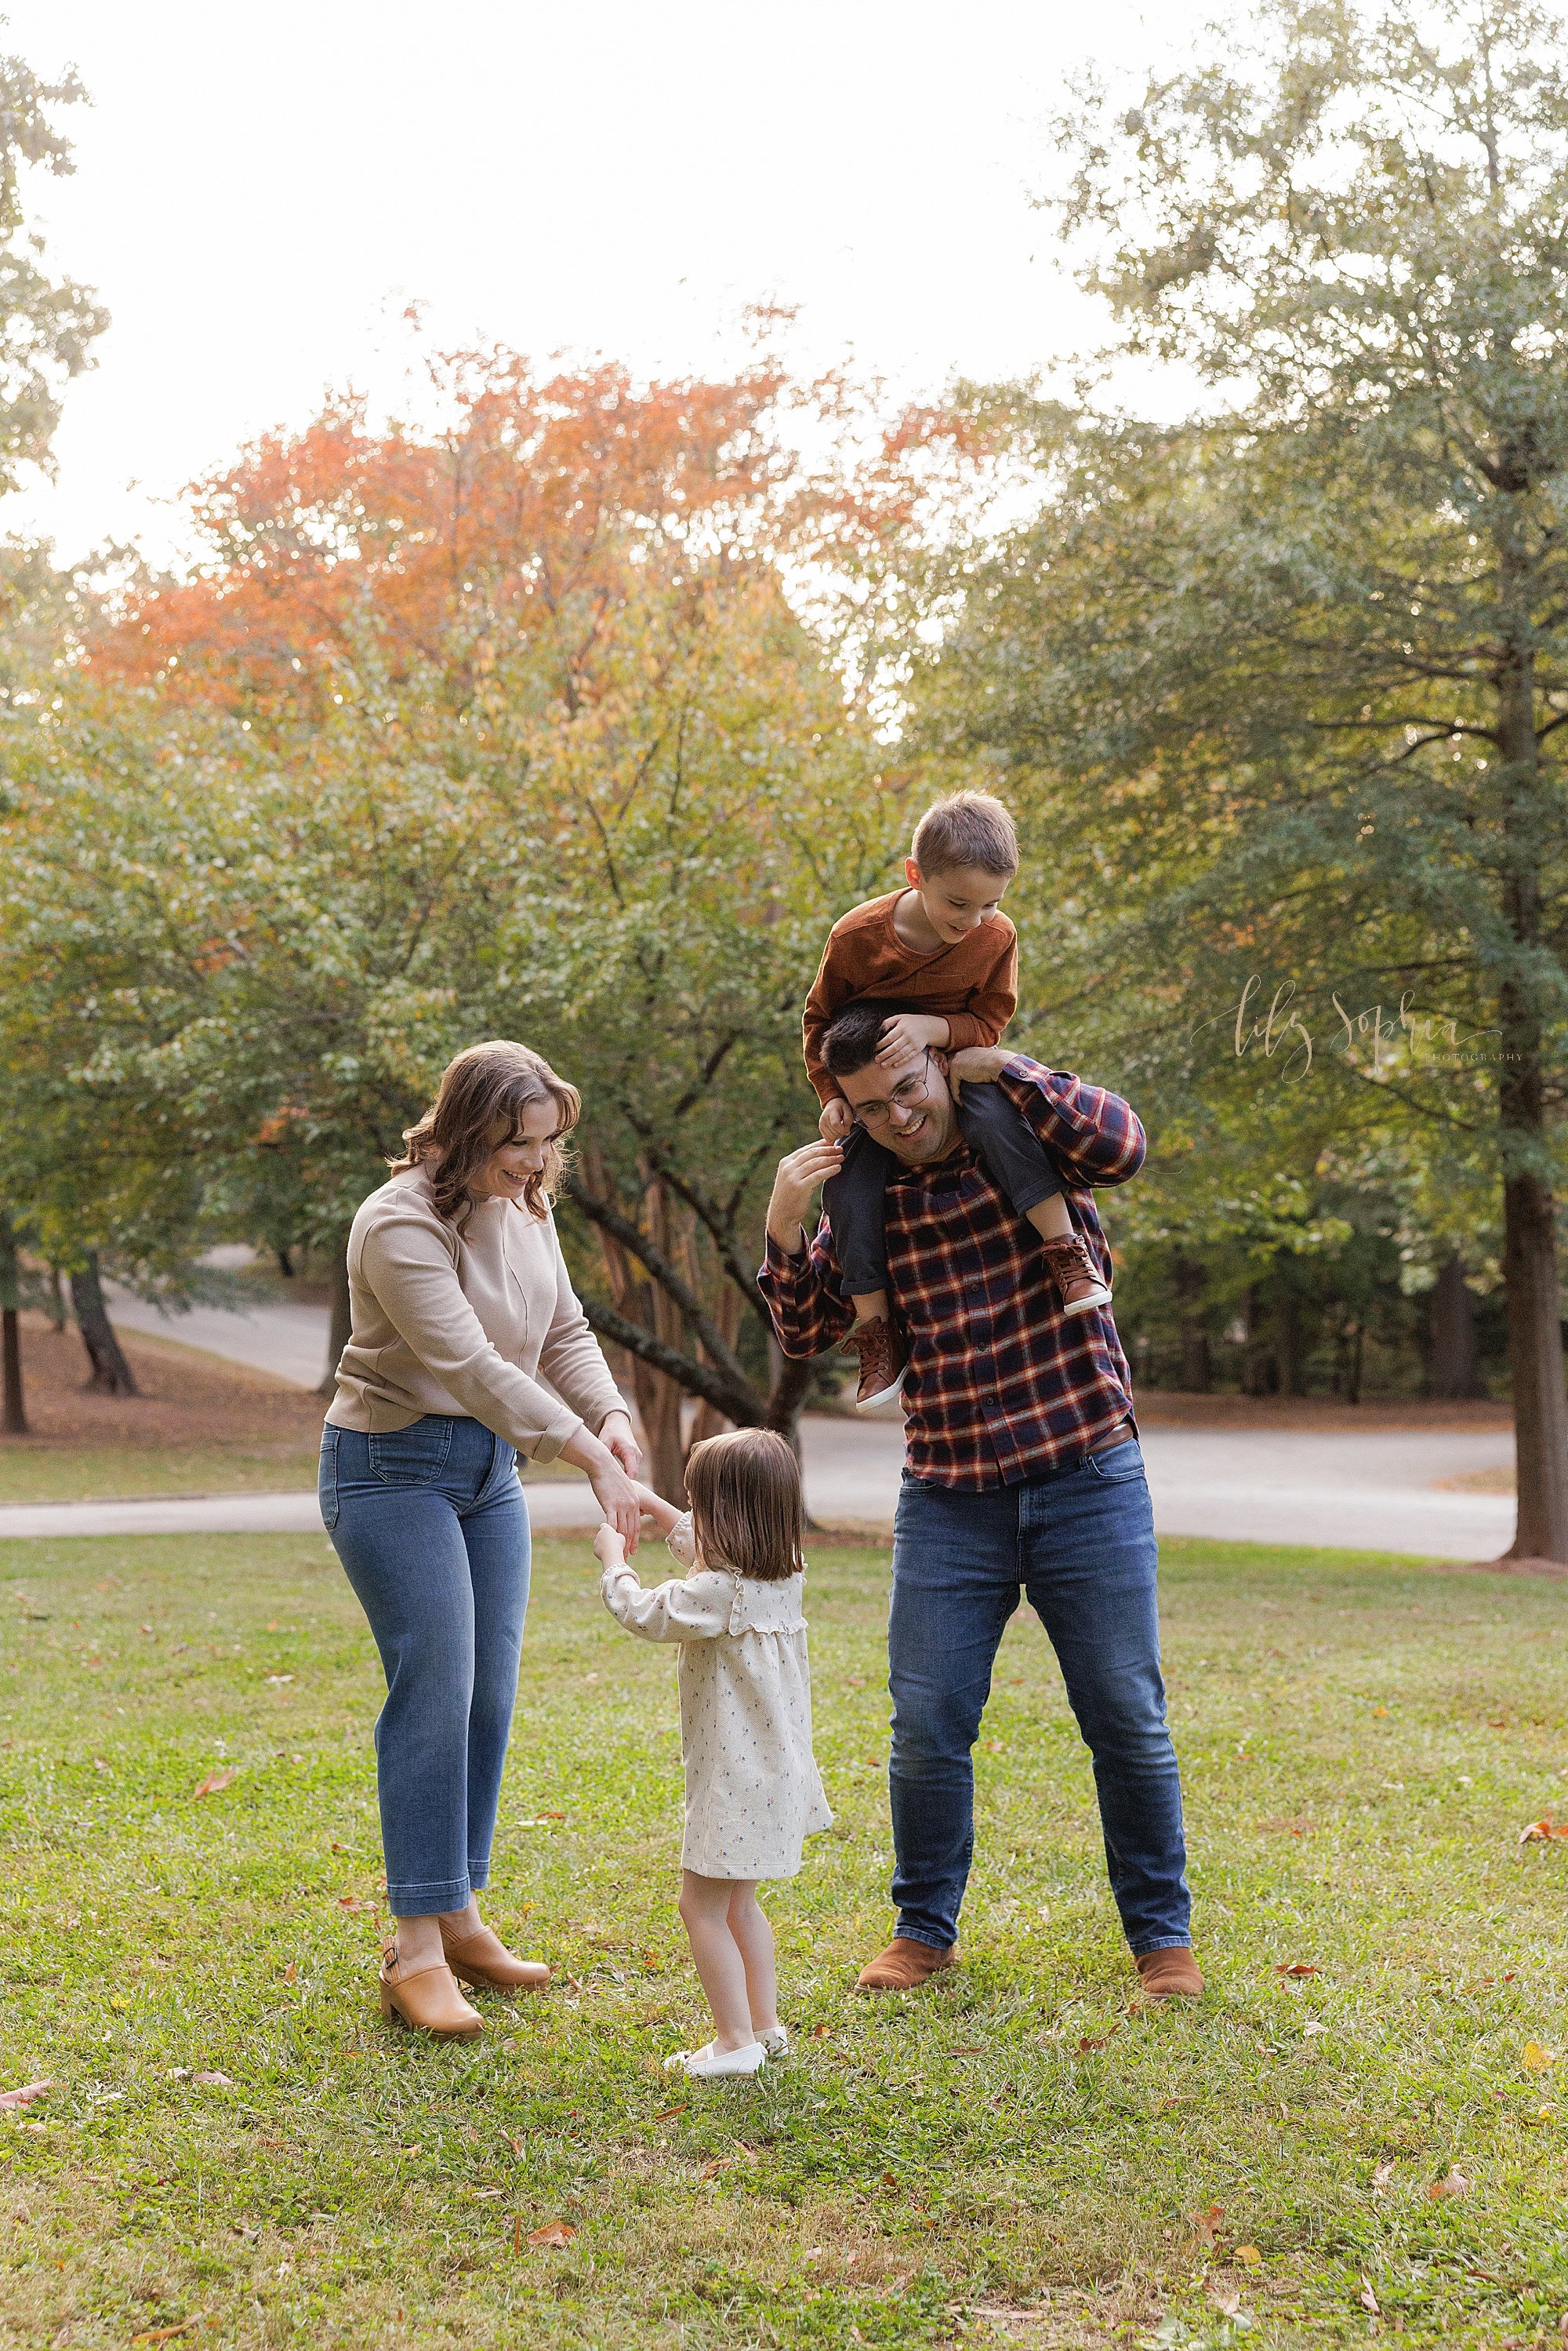 intown-atlanta-decatur-brookhaven-buckhead-outdoor-fall-pictures-family-photoshoot_5553.jpg